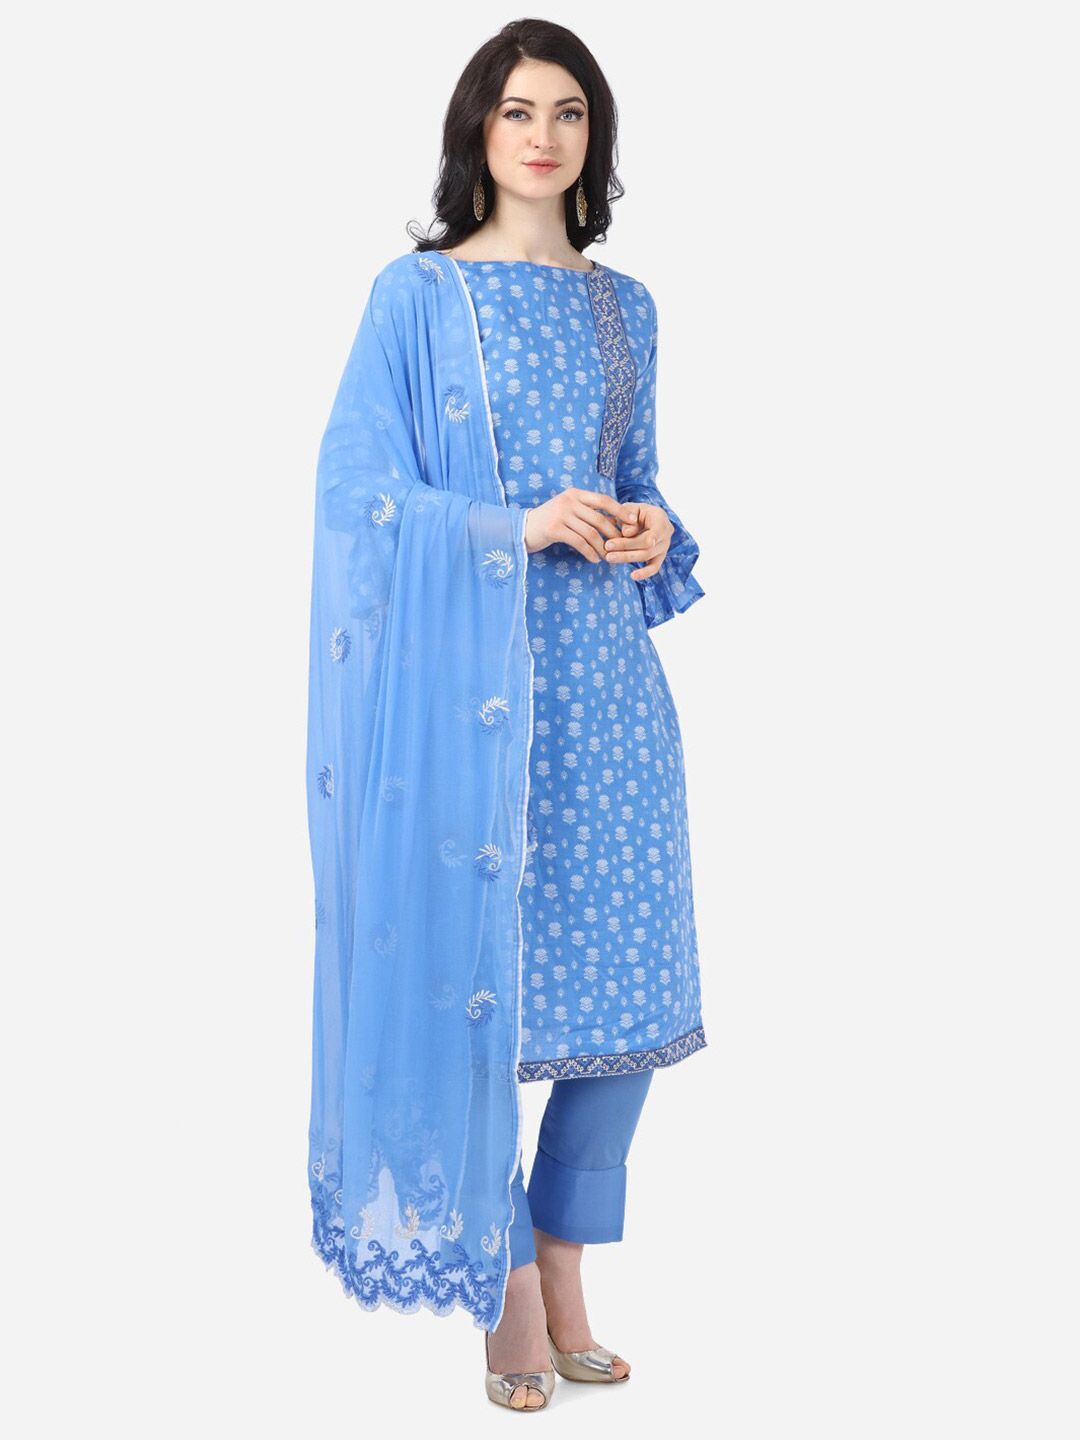 DIVASTRI Blue & White Floral Printed Unstitched Dress Material With Embroidered Dupatta Price in India